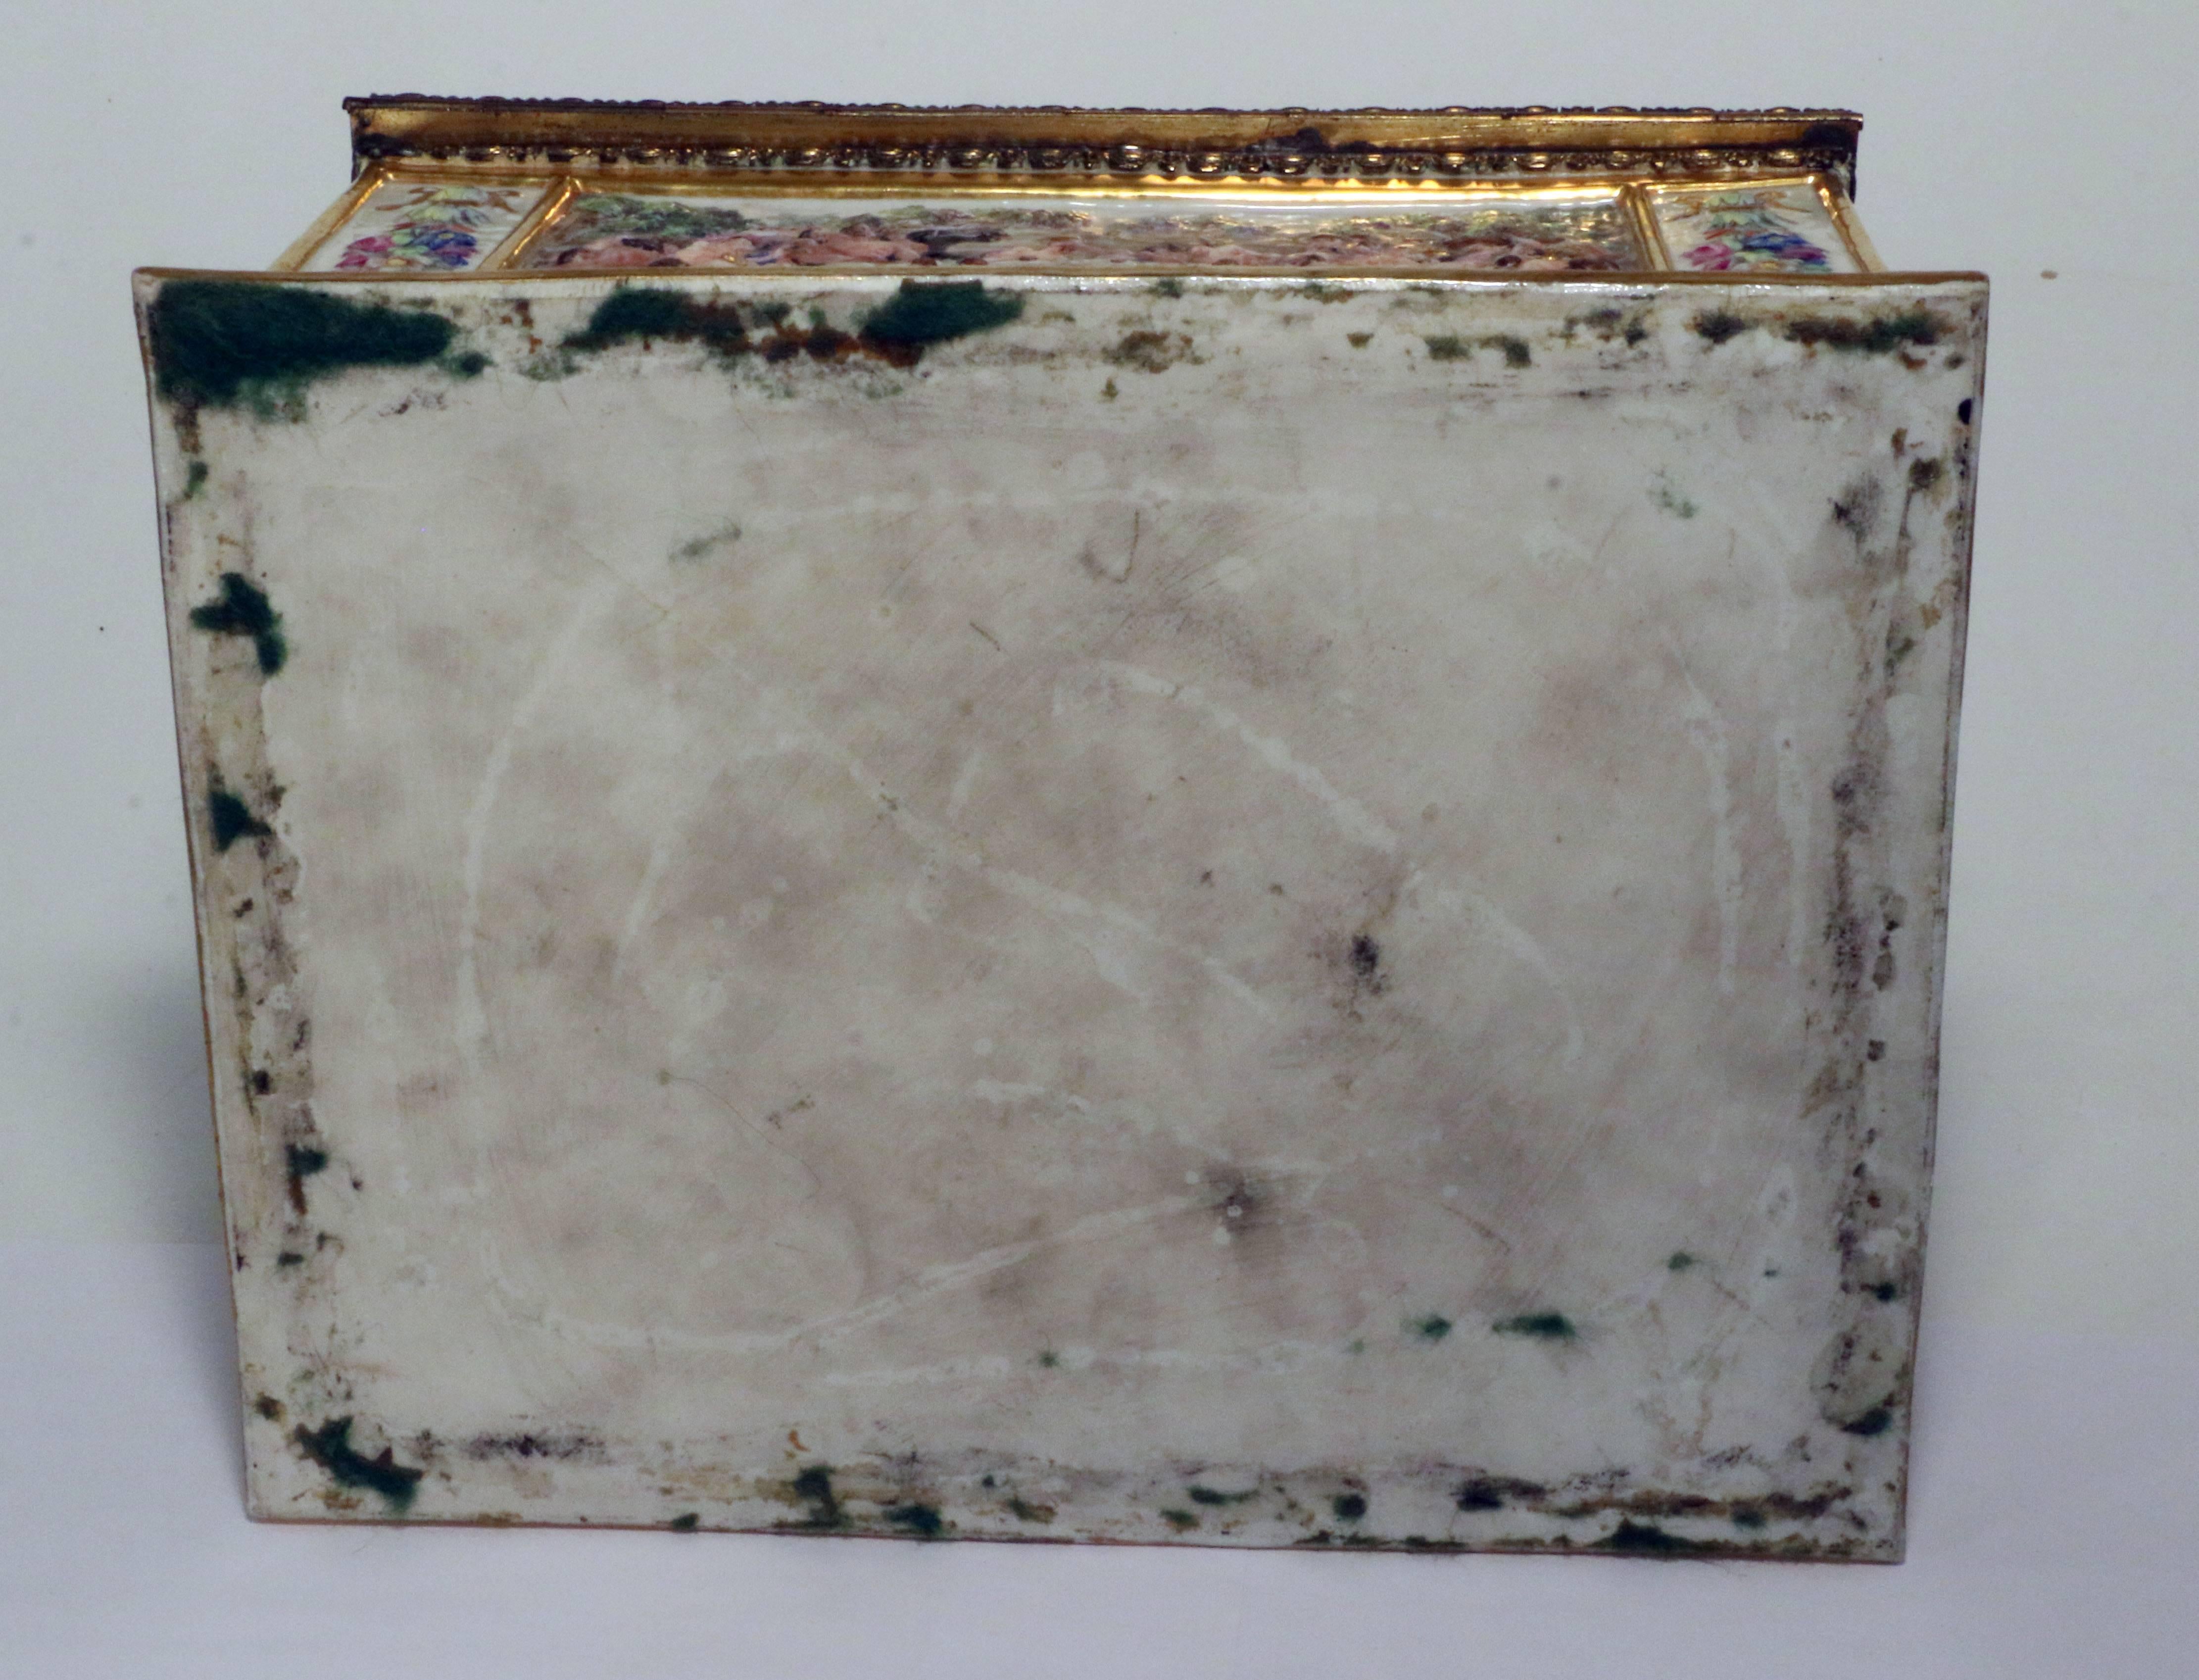 Large Capo di Monte Rectangular Casket For Sale at 1stDibs